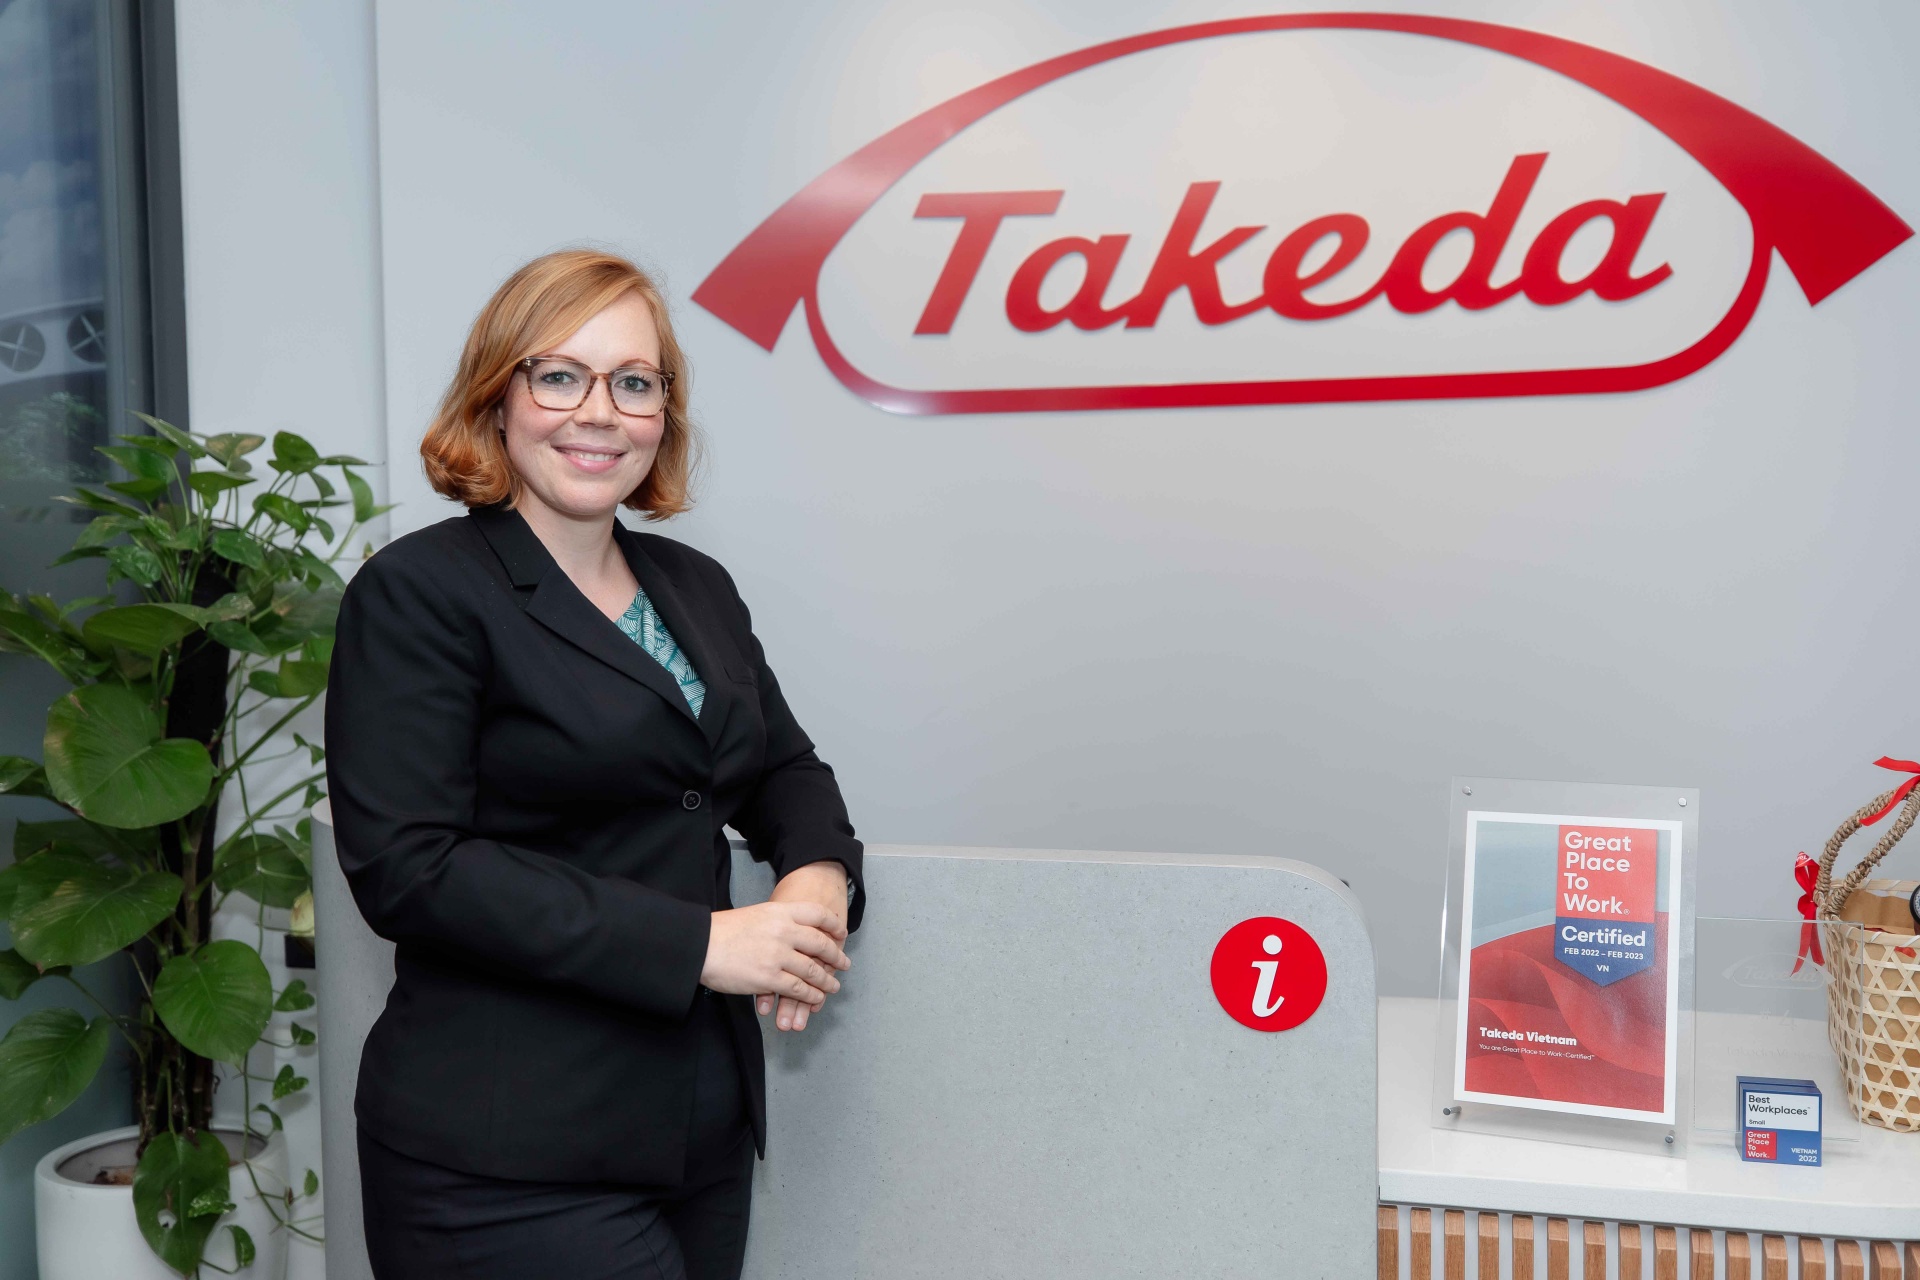 Takeda Vietnam wins Best Workplace in Asia 2022 award by Great Place to Work